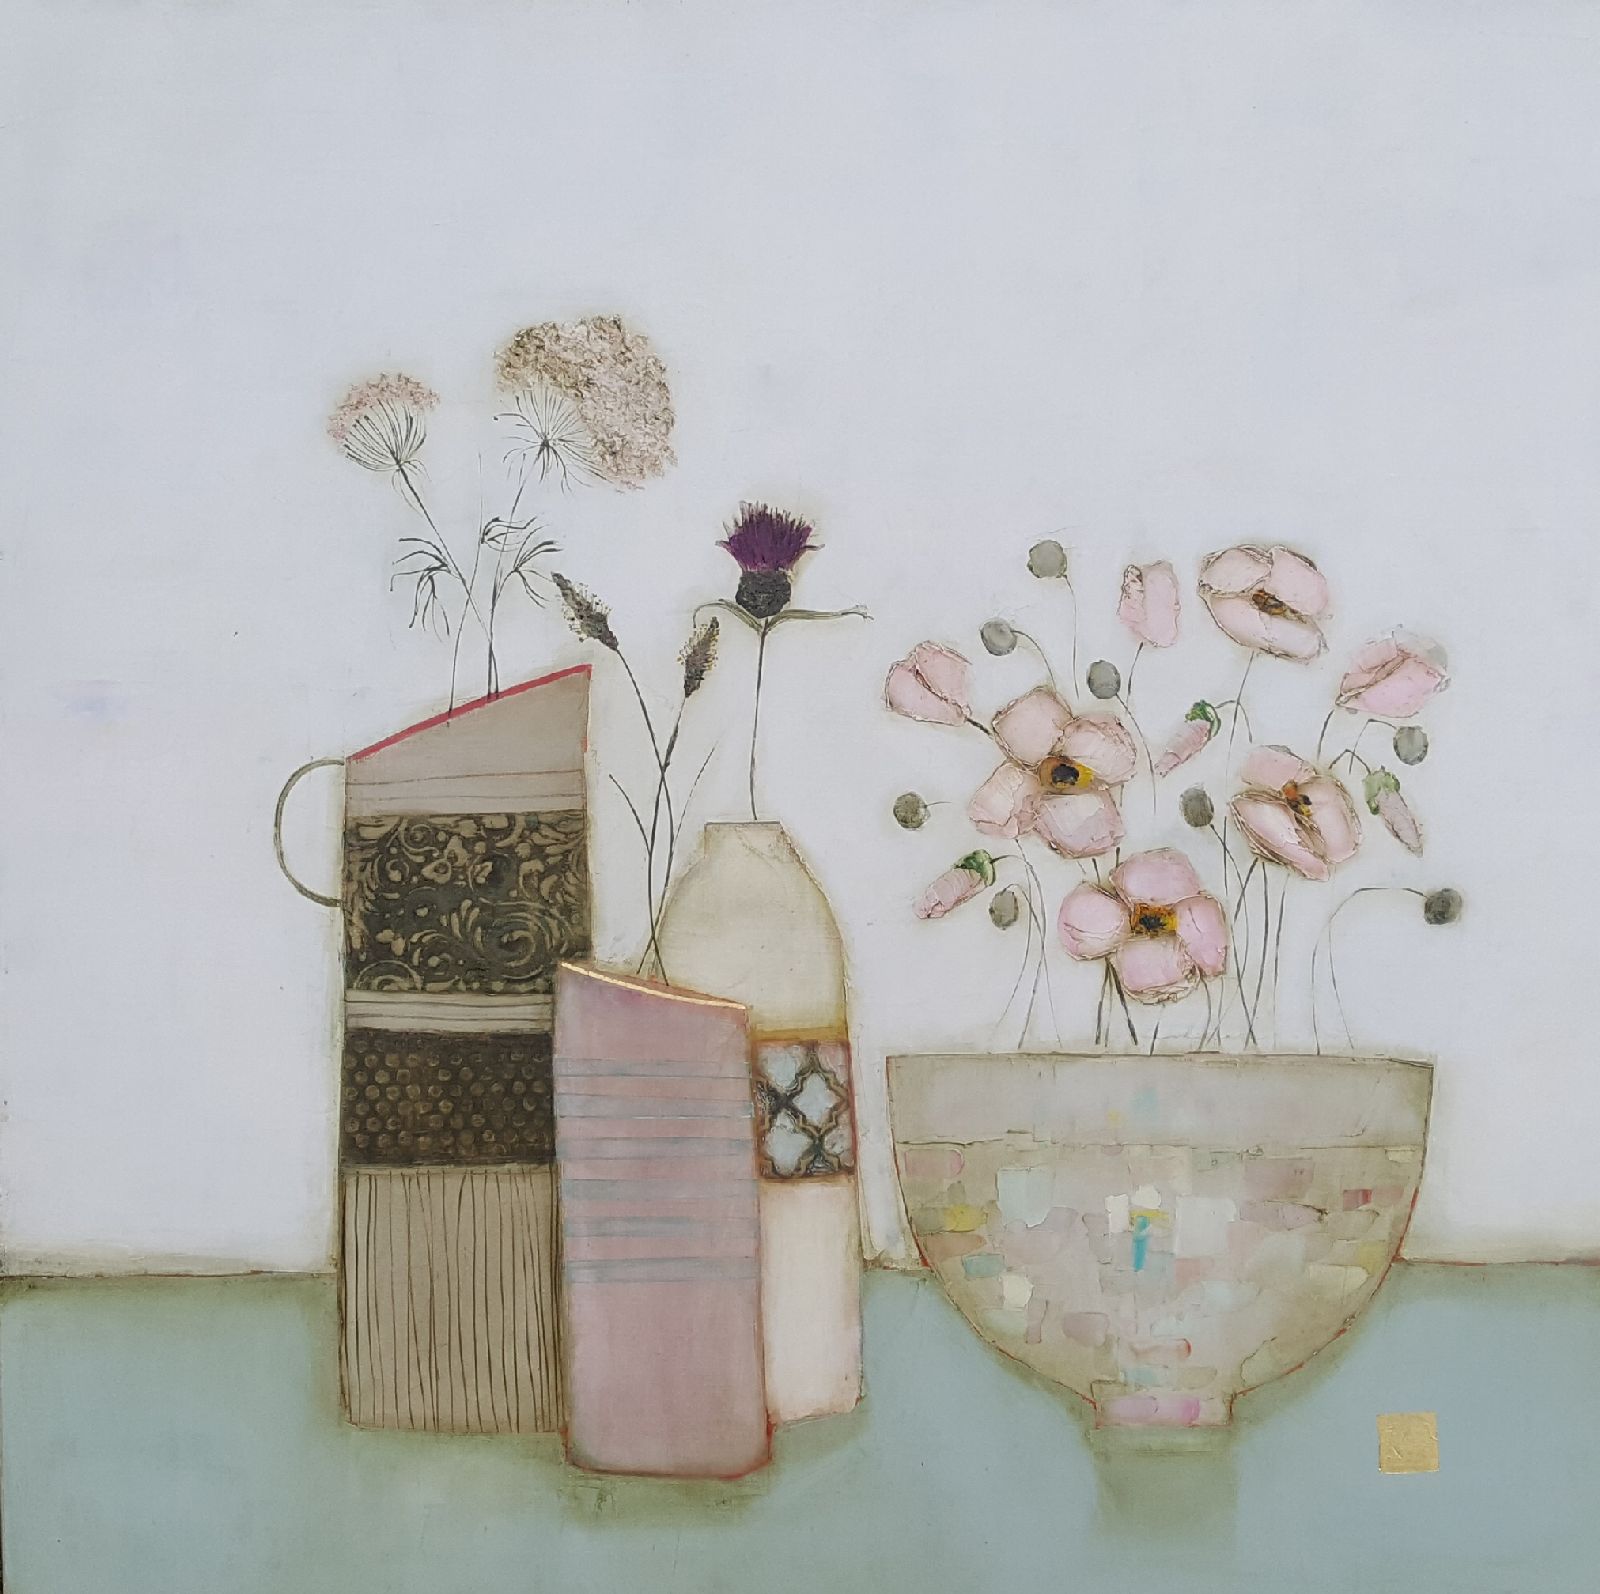 Japanese anemone and wild flowers by Eithne  Roberts